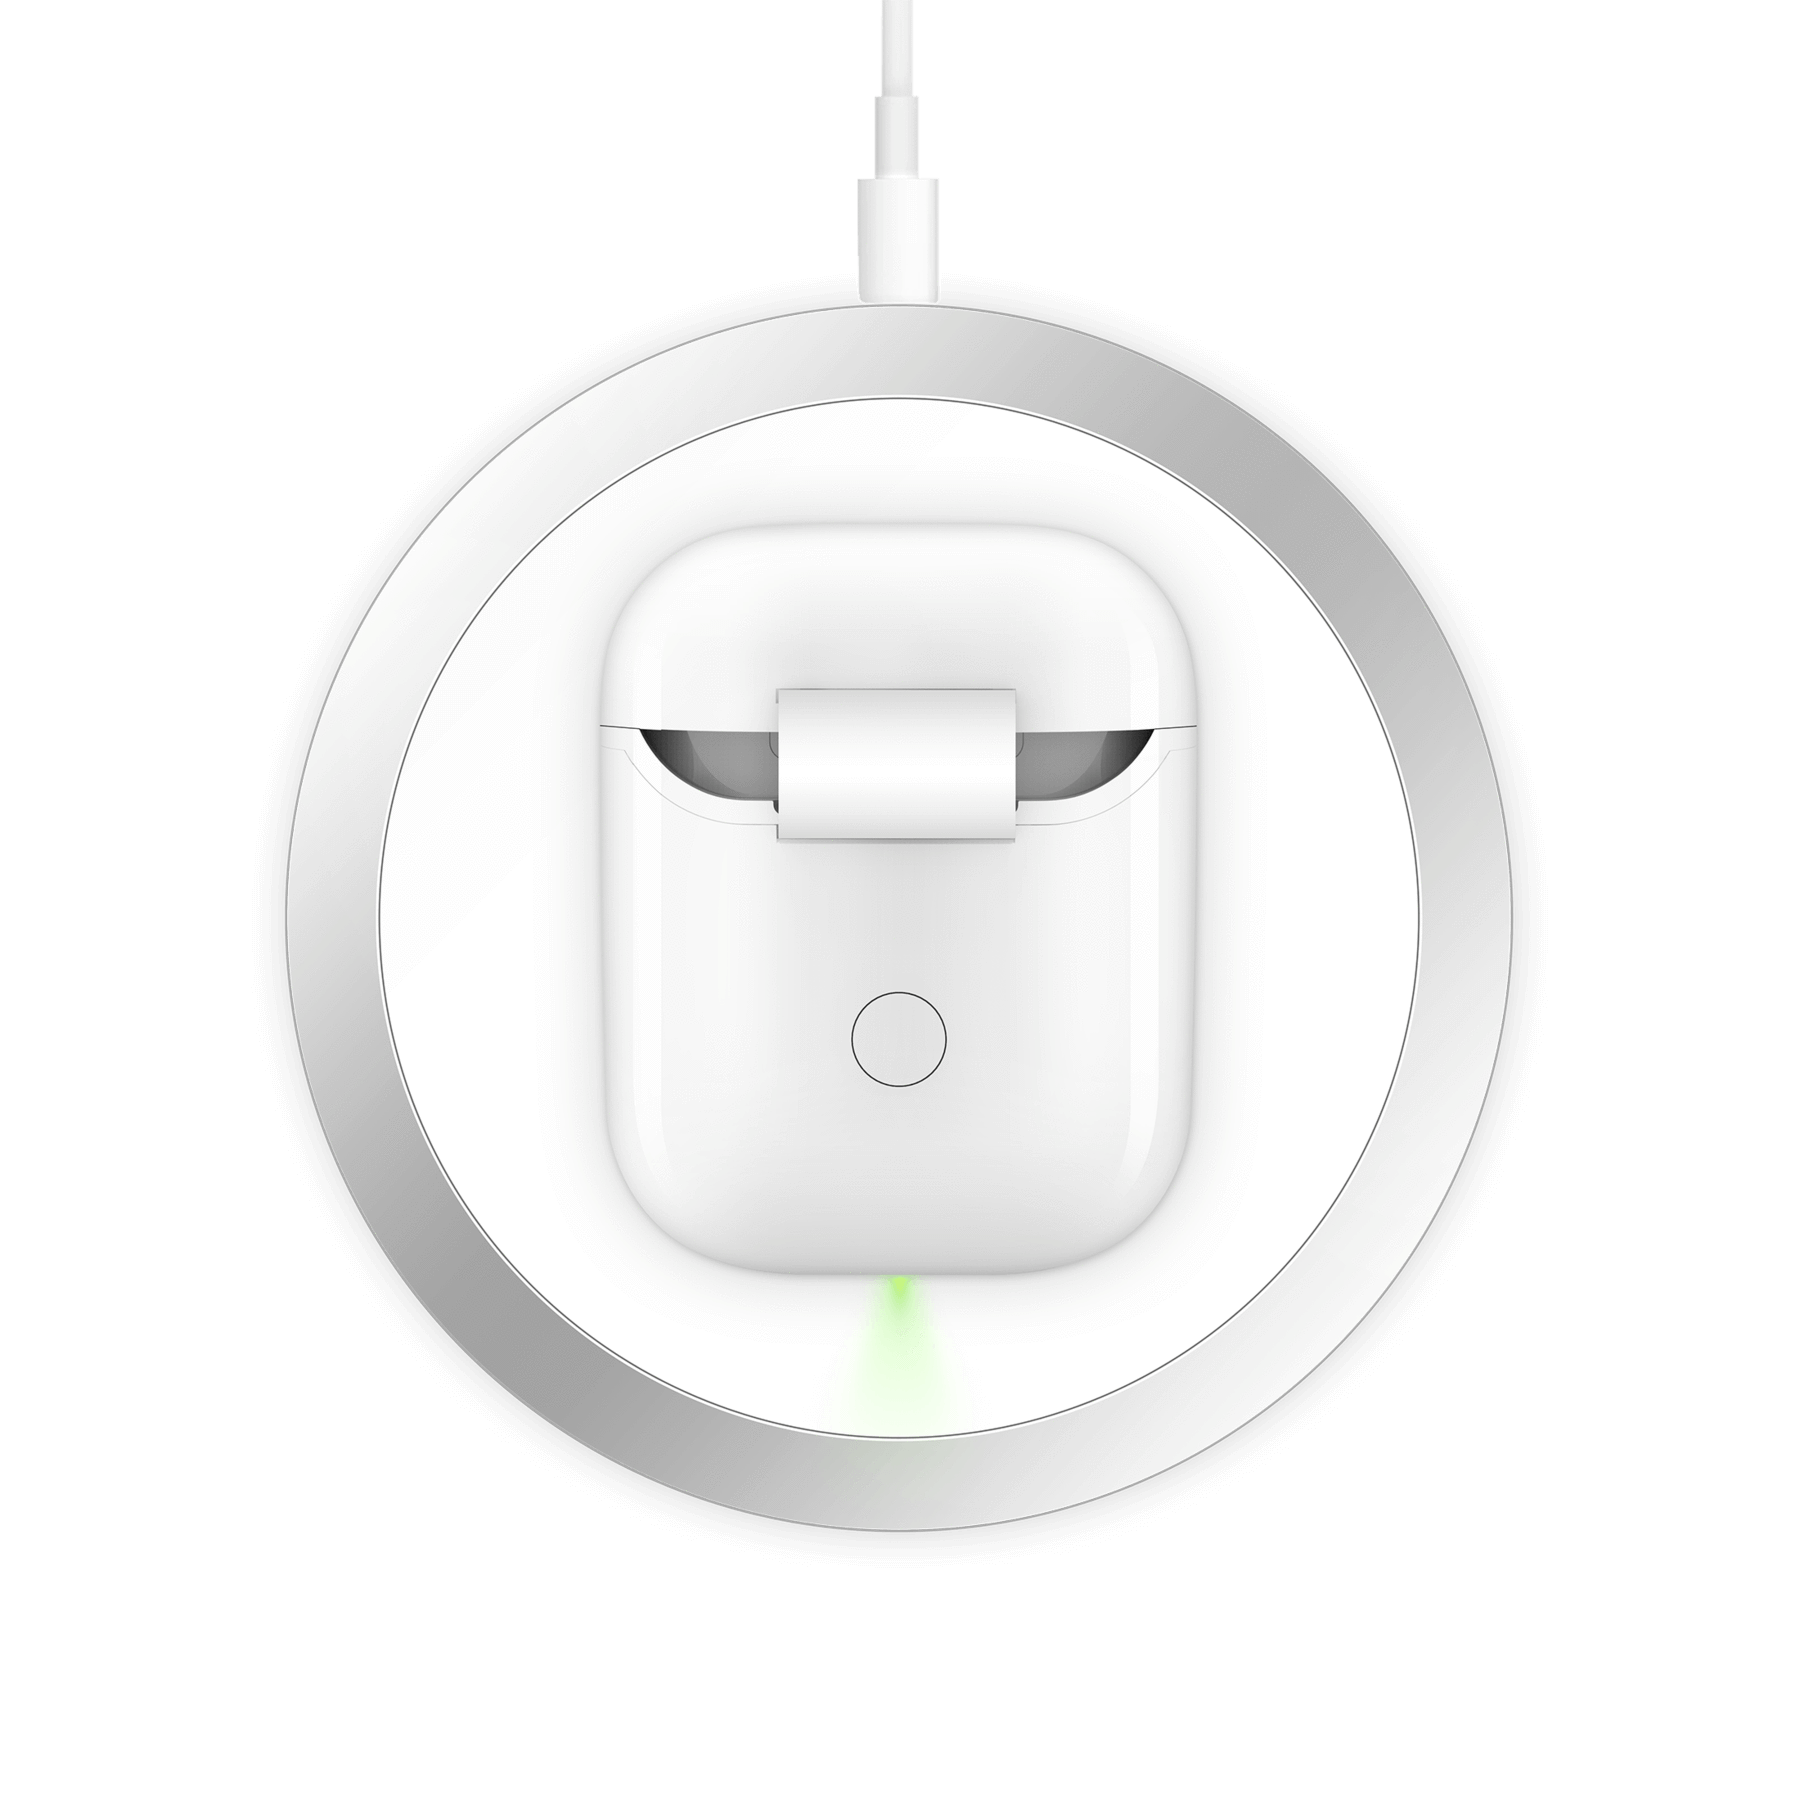 HyperJuice Wireless Charging Case AirPods - kite+key, Rutgers Store